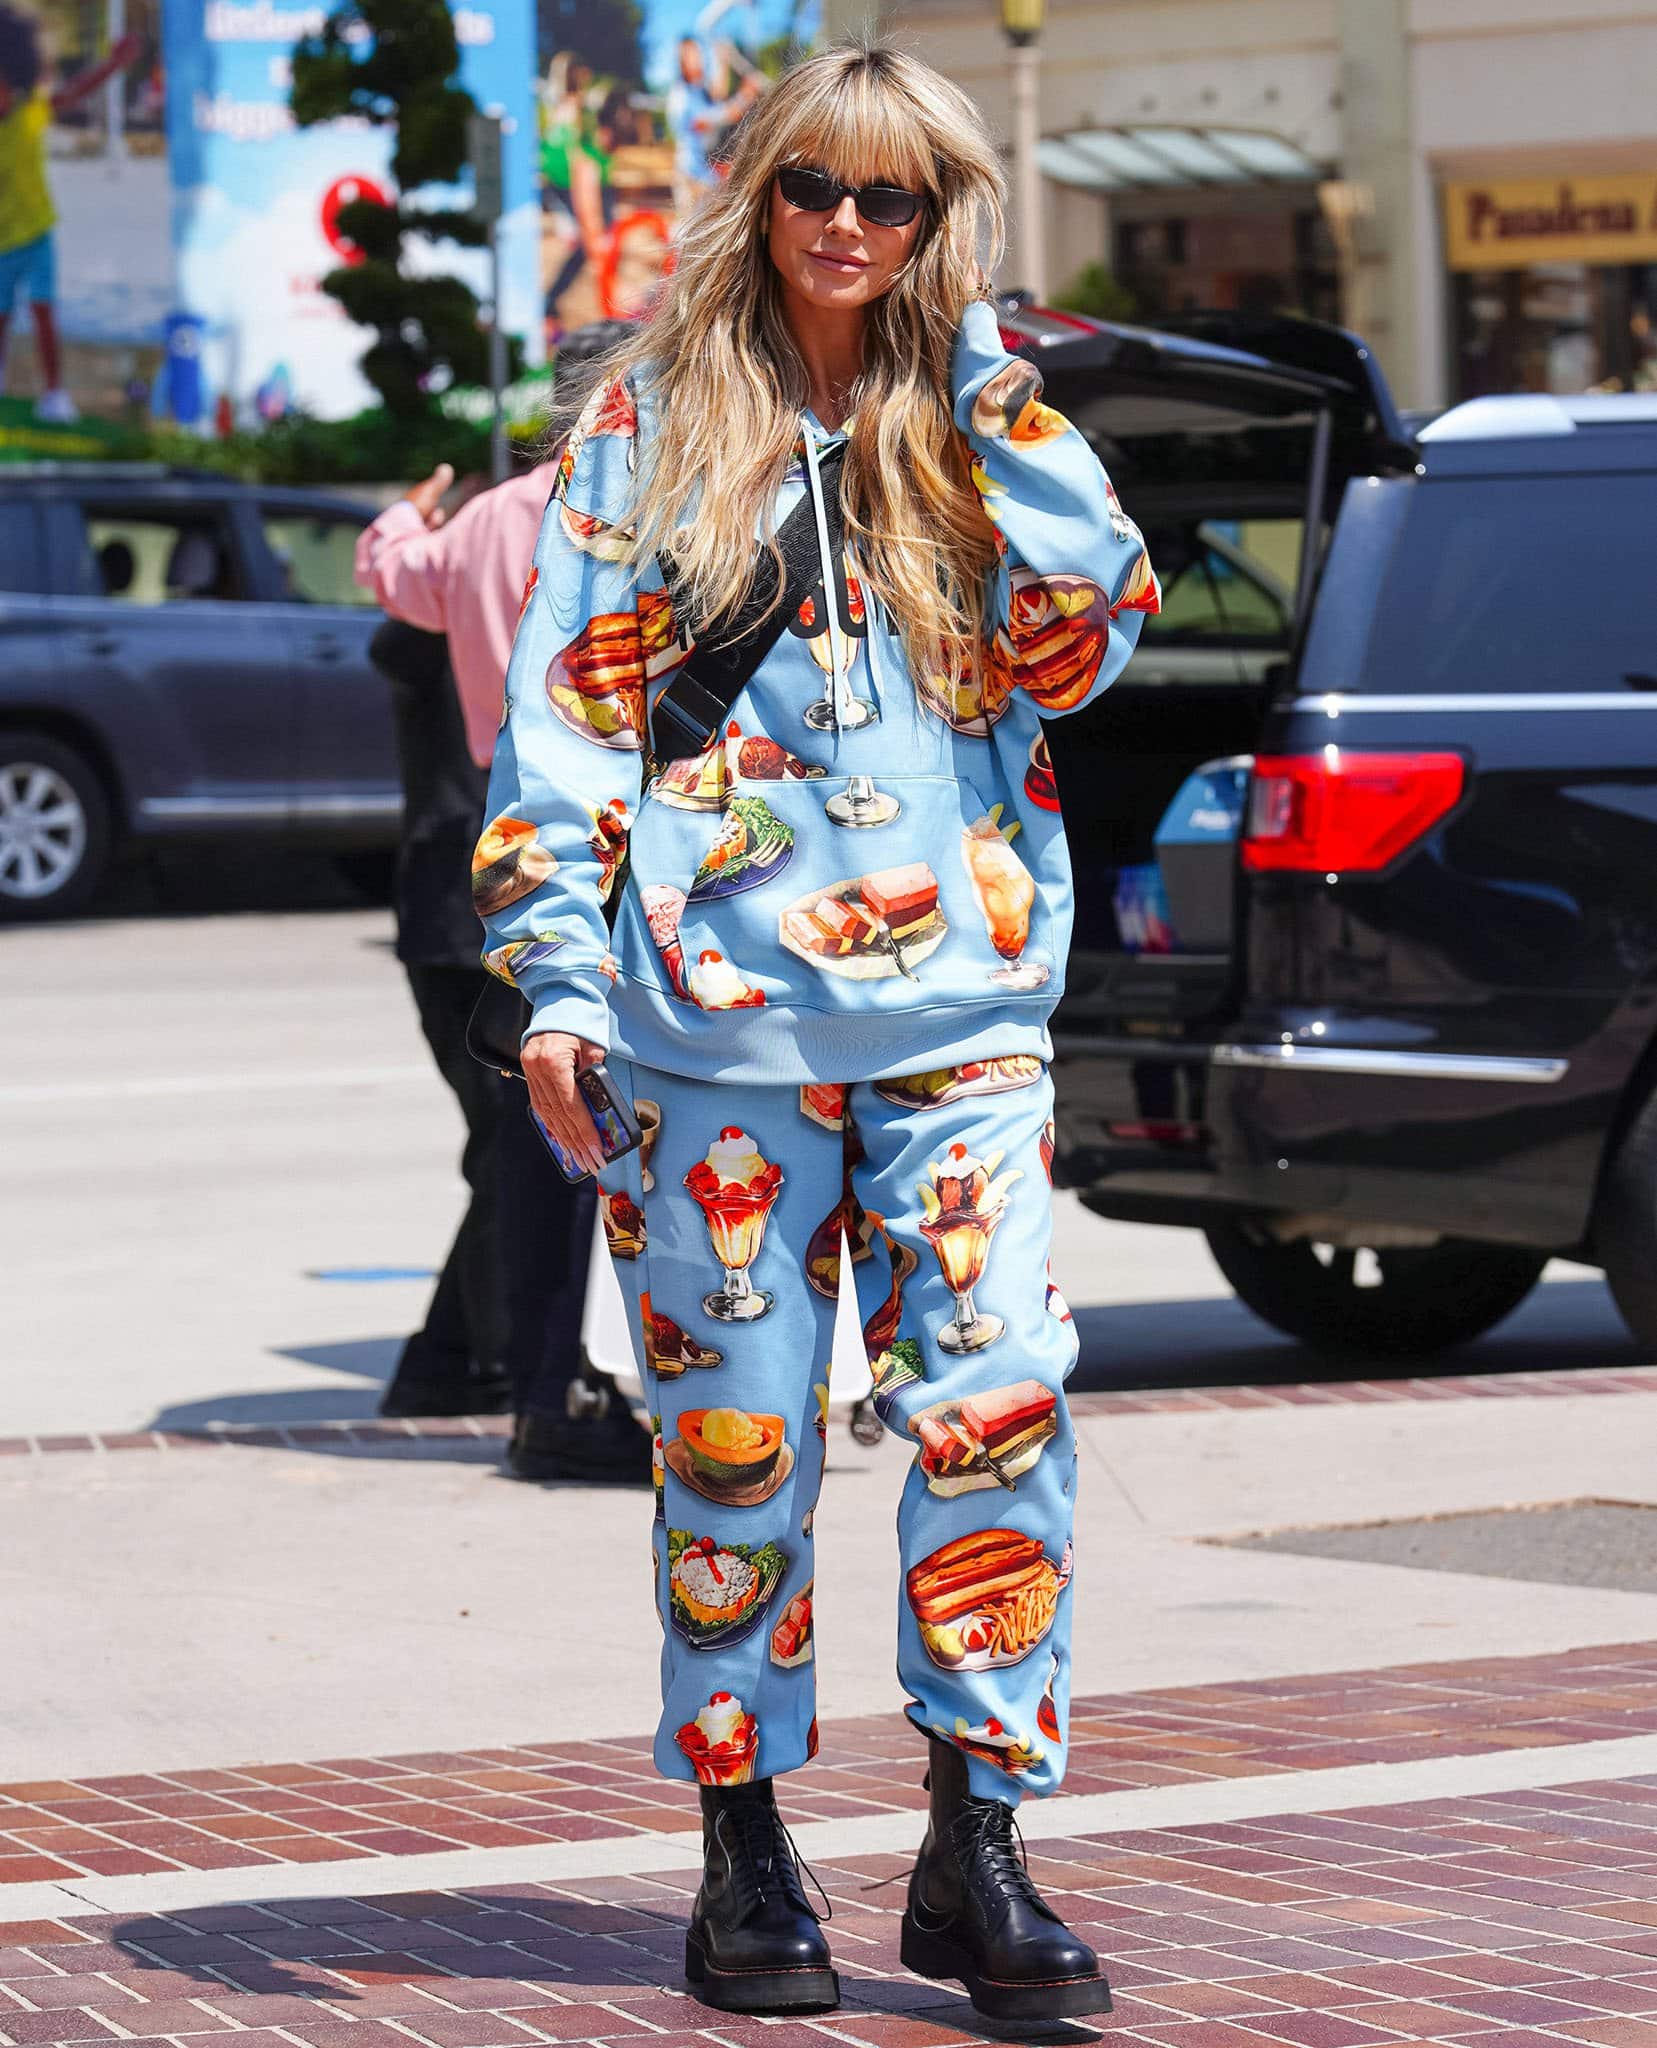 Heidi Klum makes a quirky arrival in a diner food tracksuit for America's Got Talent auditions